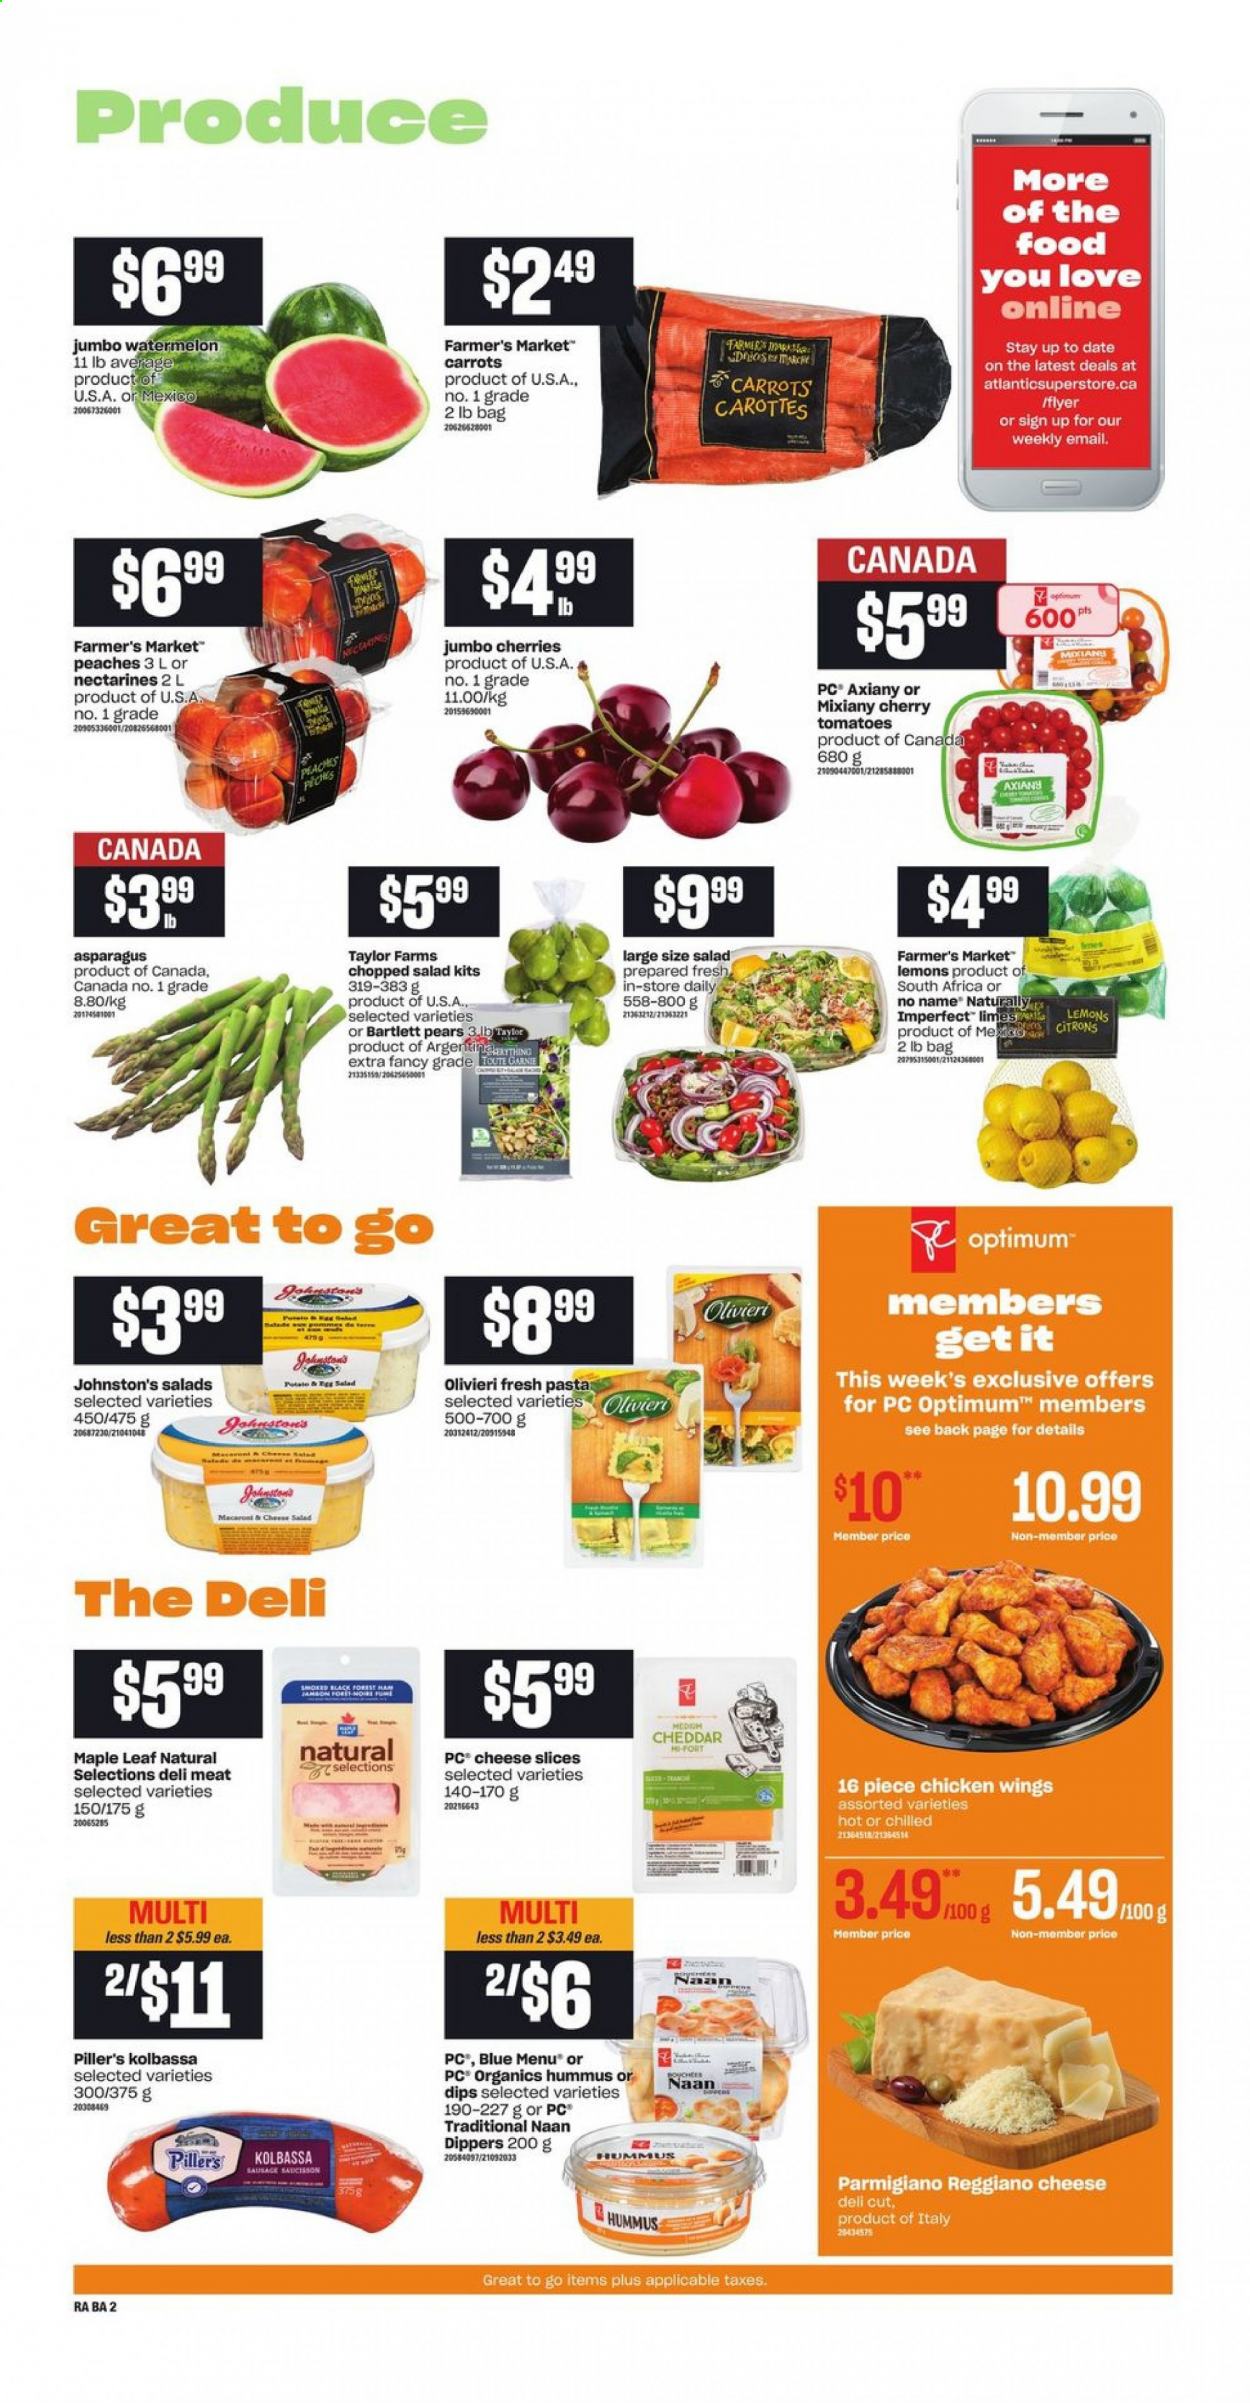 thumbnail - Atlantic Superstore Flyer - June 24, 2021 - June 29, 2021 - Sales products - asparagus, carrots, tomatoes, salad, chopped salad, Bartlett pears, limes, nectarines, watermelon, cherries, pears, lemons, peaches, No Name, macaroni, hummus, sliced cheese, cheddar, cheese, Parmigiano Reggiano, chicken wings, bag, Optimum. Page 3.